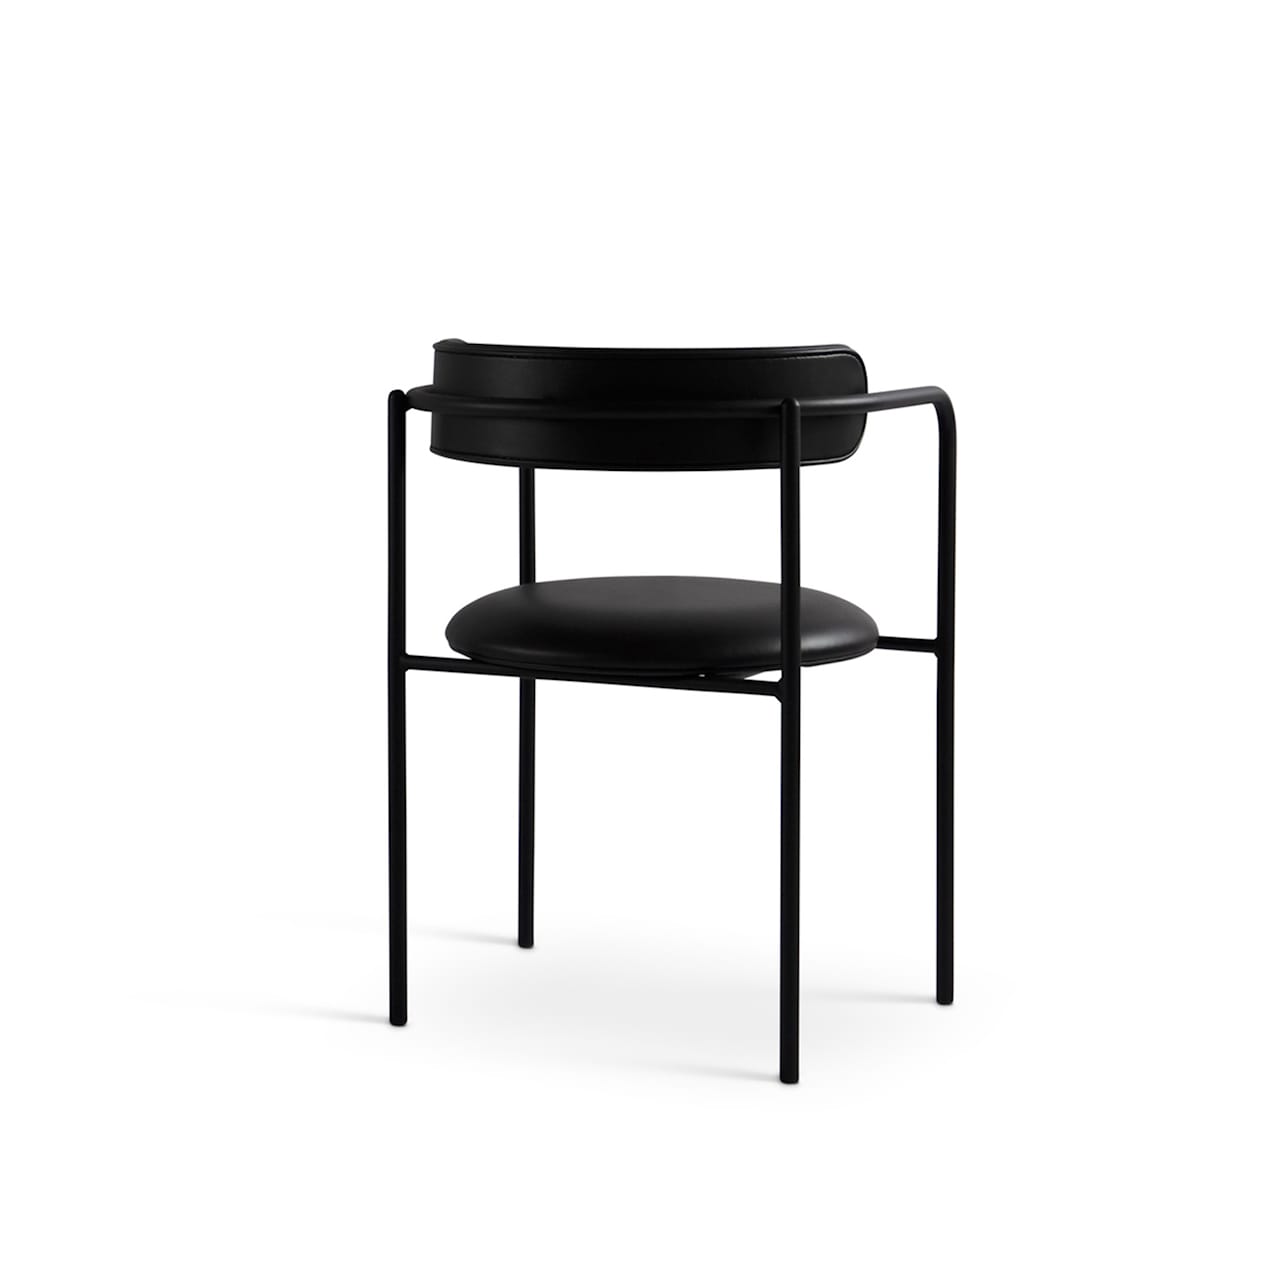 FF Chair Rounded Black Legs